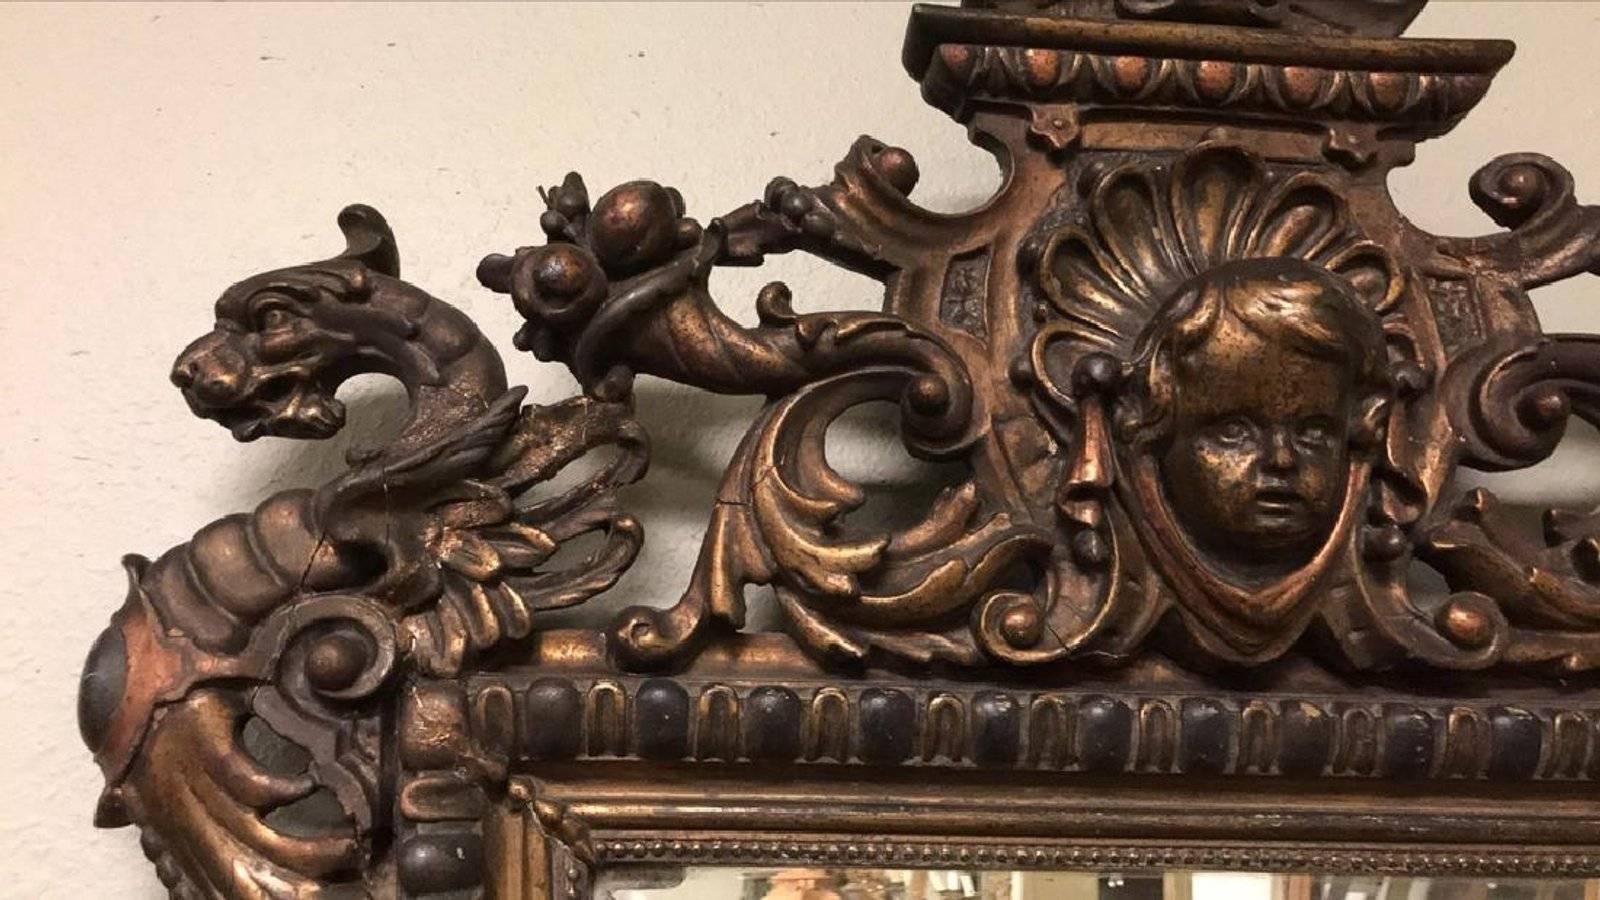 Exceptional 19th century French baroque bevel edged wall mirror of tapering form. Ornately carved with leaf scrolls, cherub masques, dragon heads, shells, and baskets of festoon with old gold leaf finish,

circa 1870

Good condition but damage